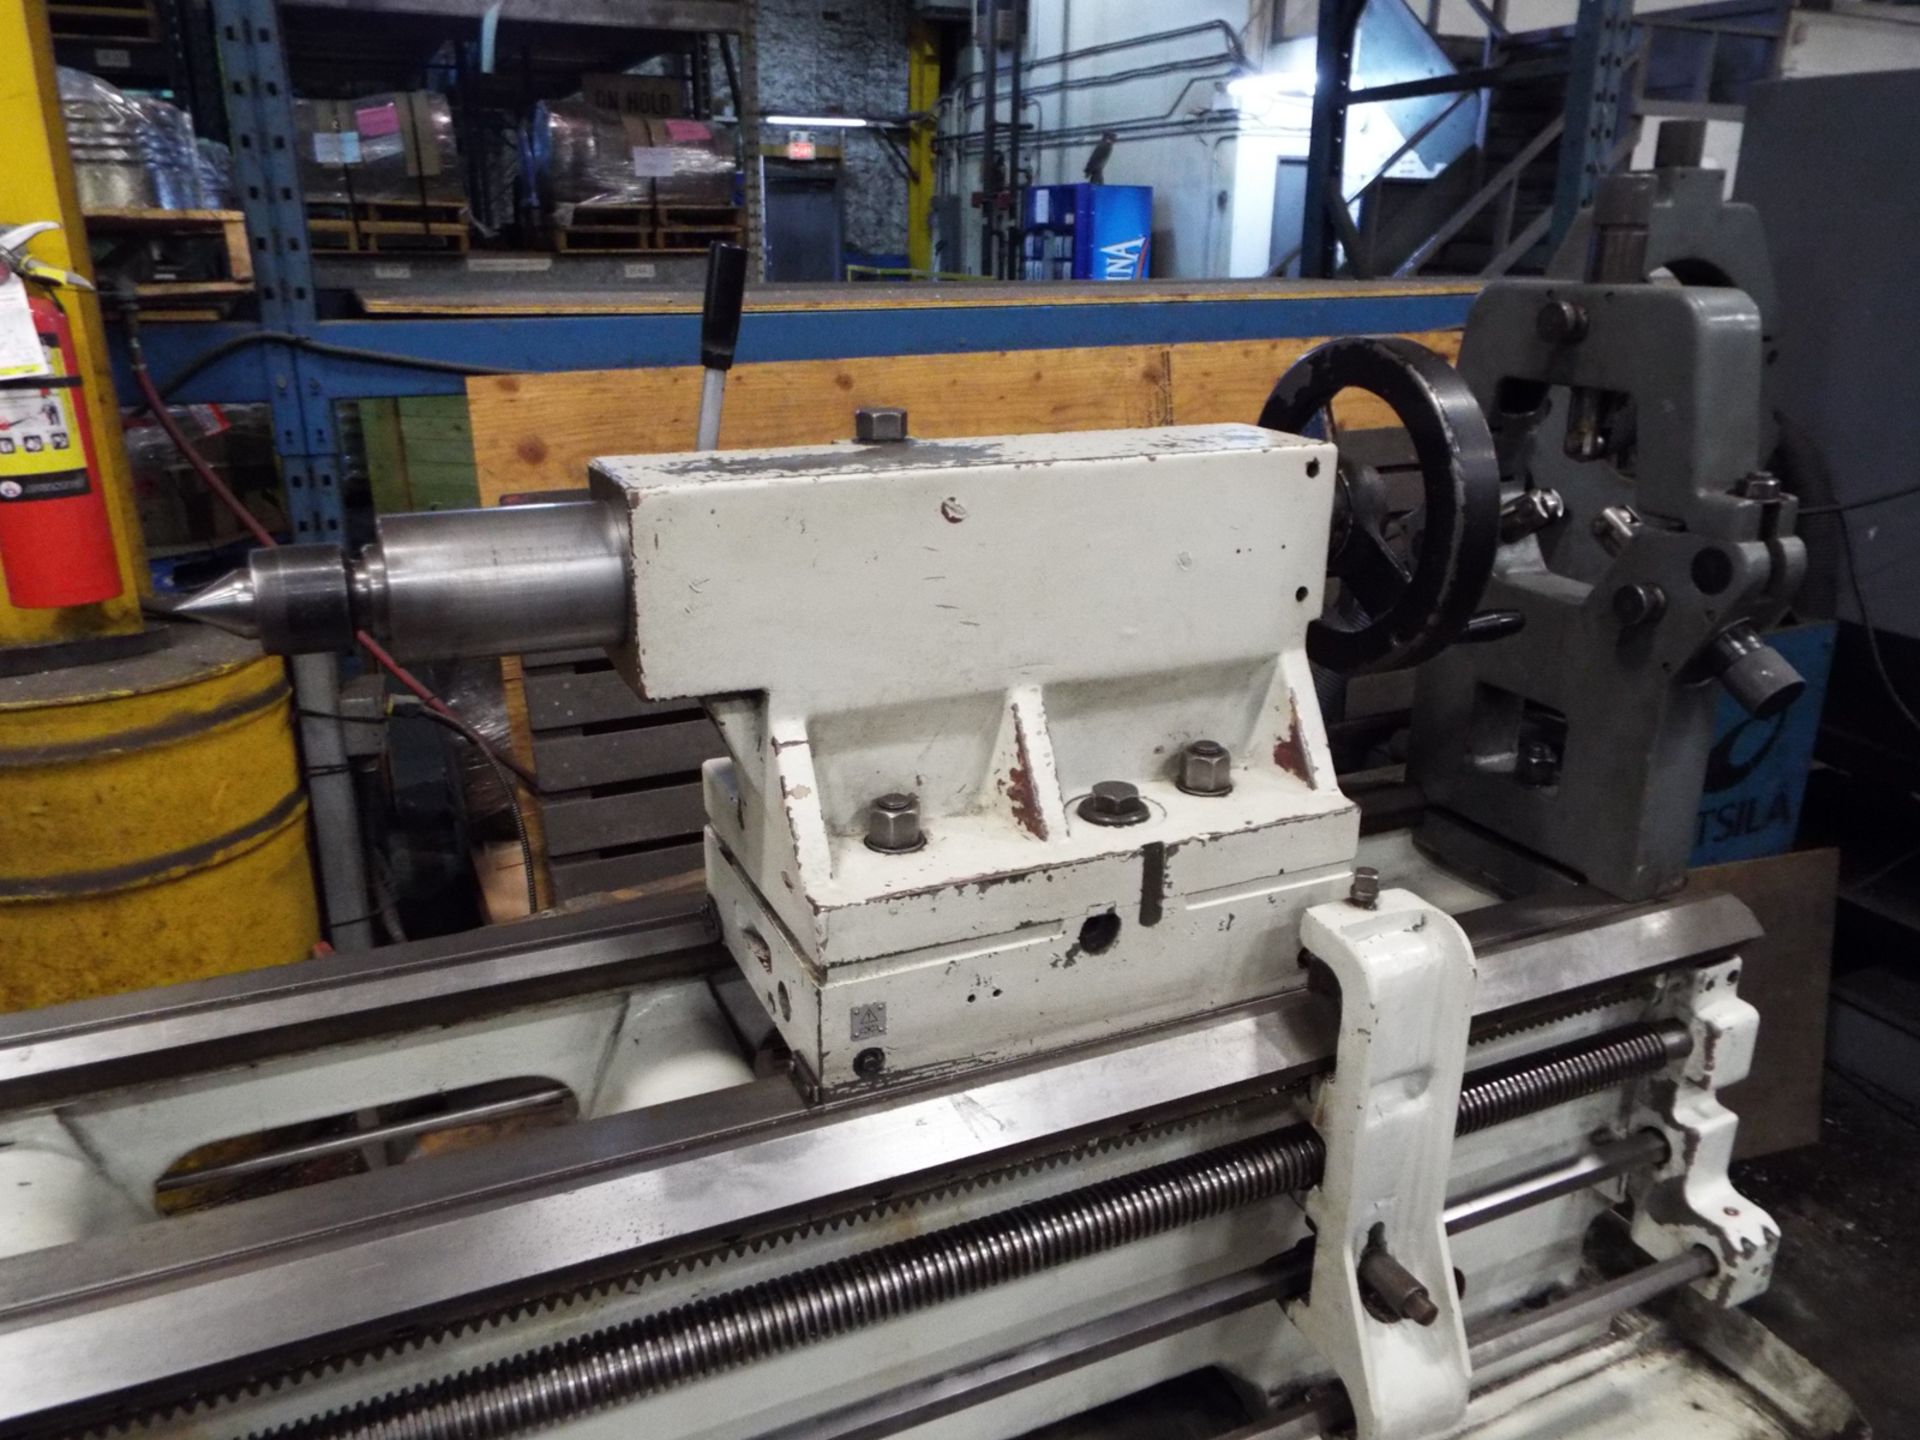 TOS SN 7105 ENGINE LATHE WITH 30" SWING OVER BED, 165" BETWEEN CENTERS, 4" SPINDLE BORE, SPEEDS TO - Image 9 of 10